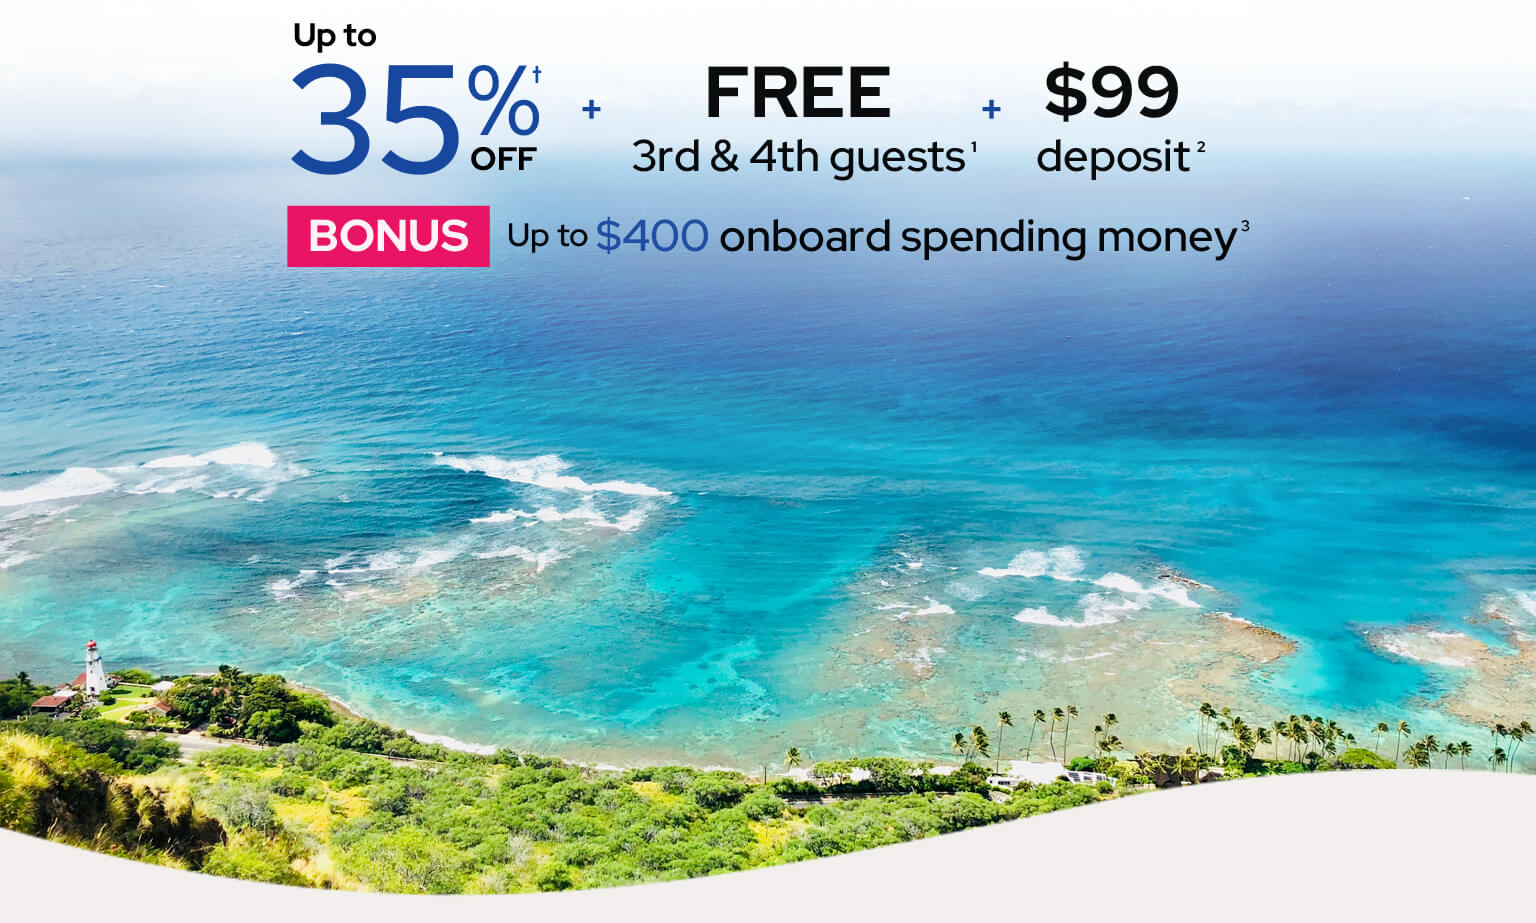 Up to 35% off† plus free 3rd and 4th guests¹ plus $99 deposit². Bonus uo to $400 onboard spending money³.